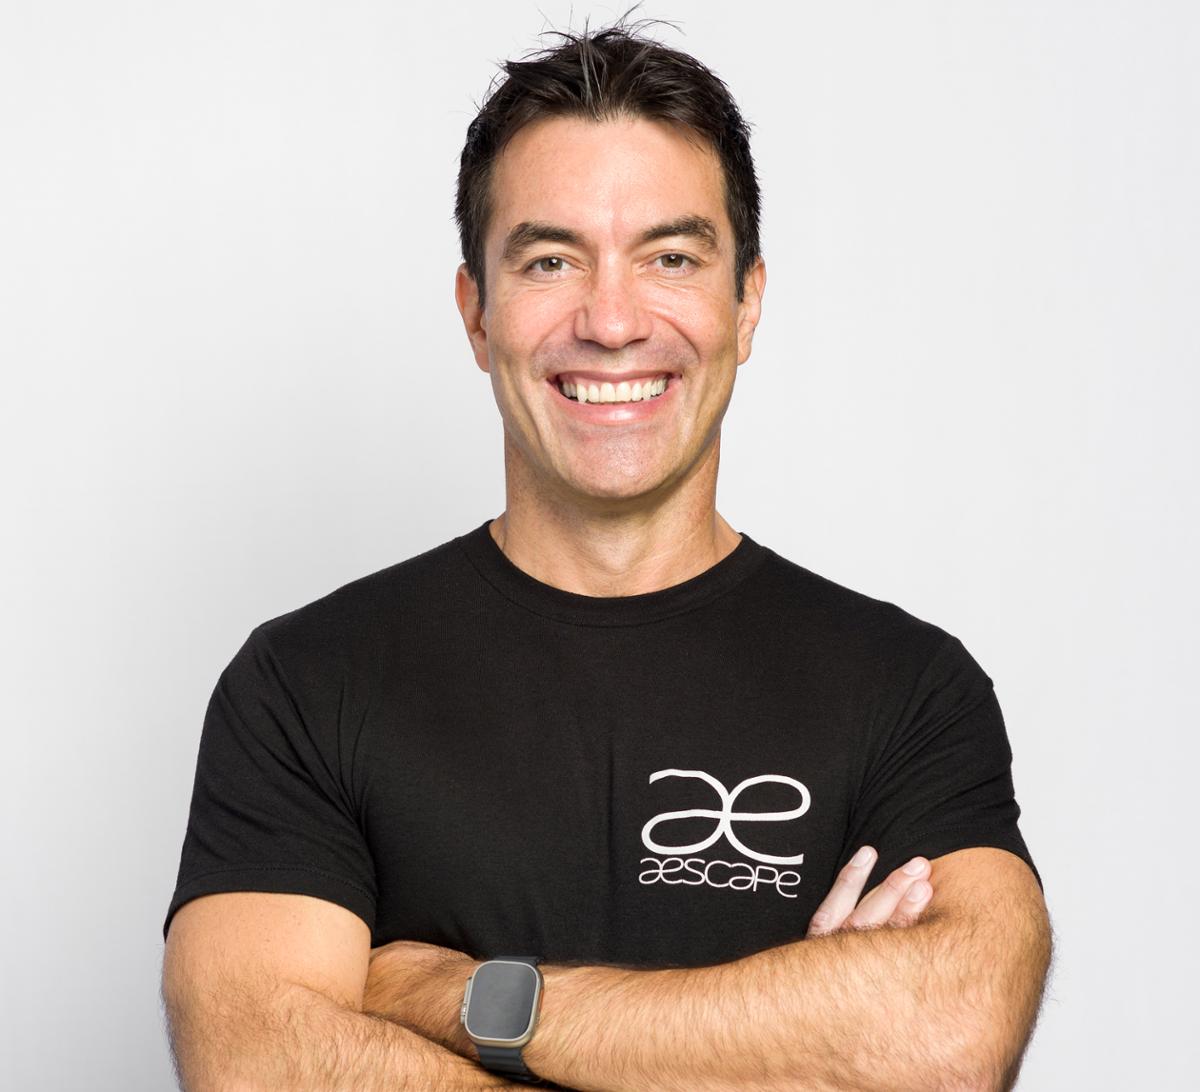 American entrepreneur Eric Litman founded Aescape in 2017 / Aescape